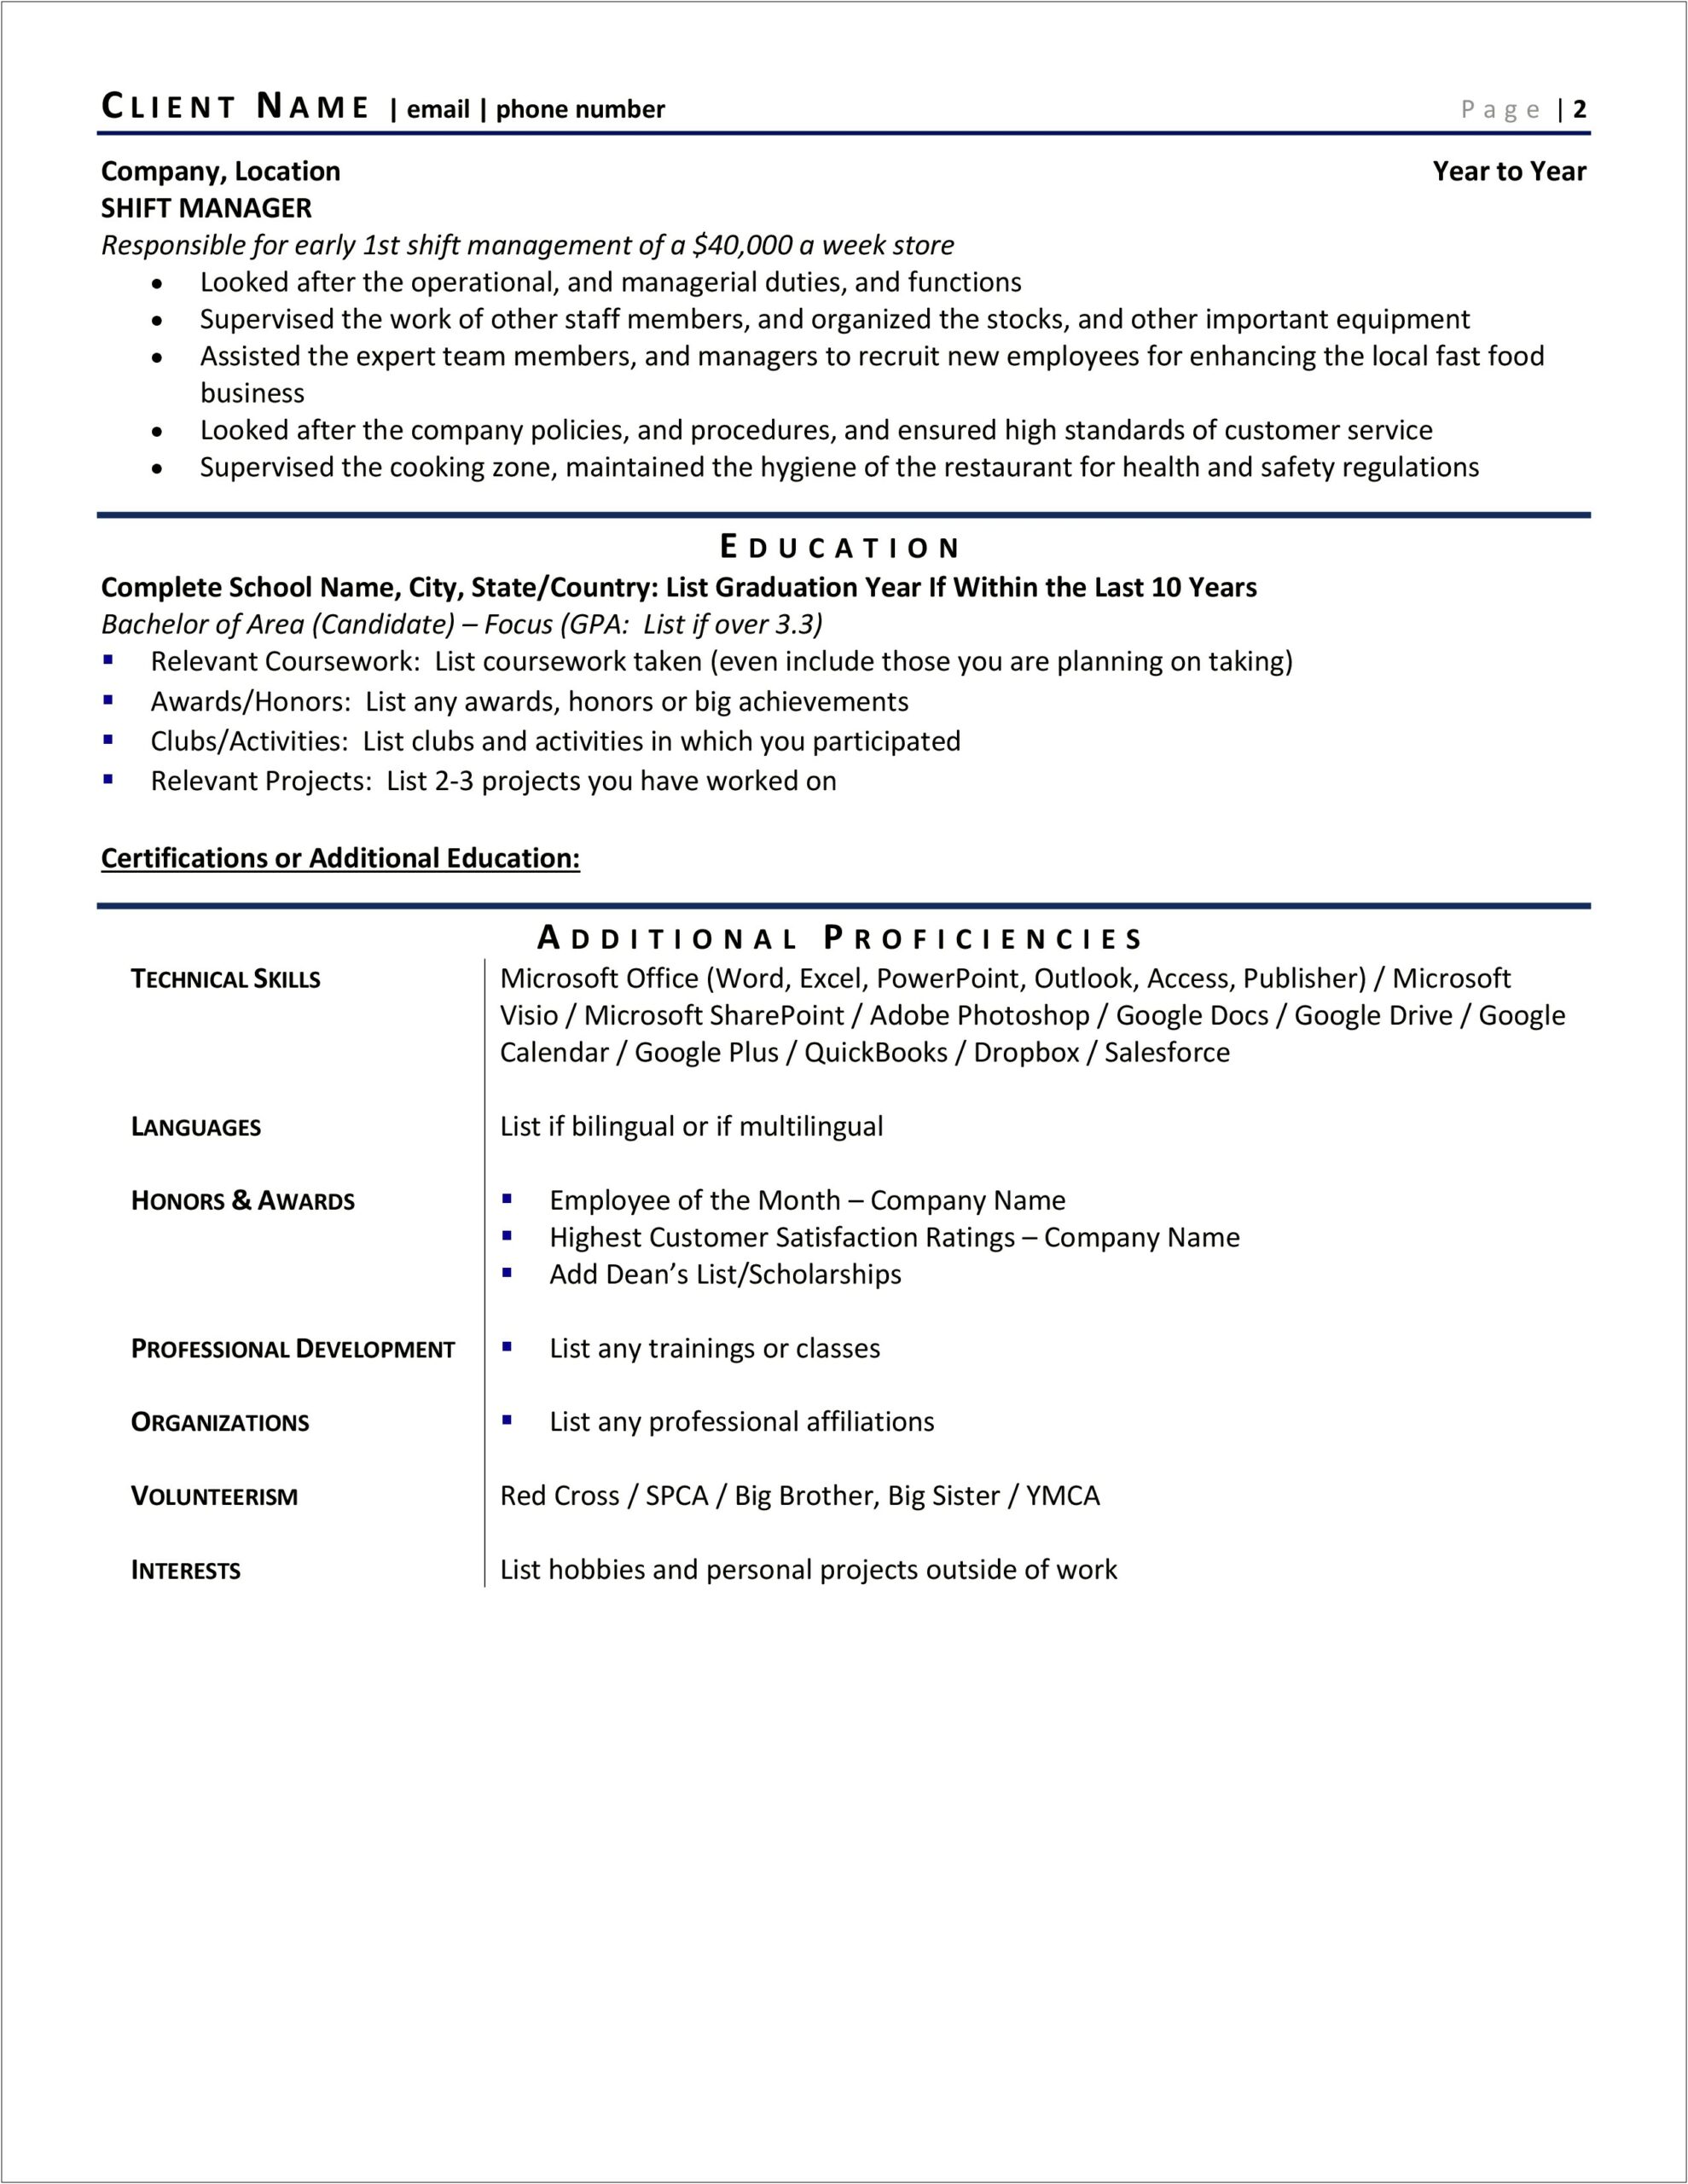 Listing Multiple Jobs On Resume In A Year